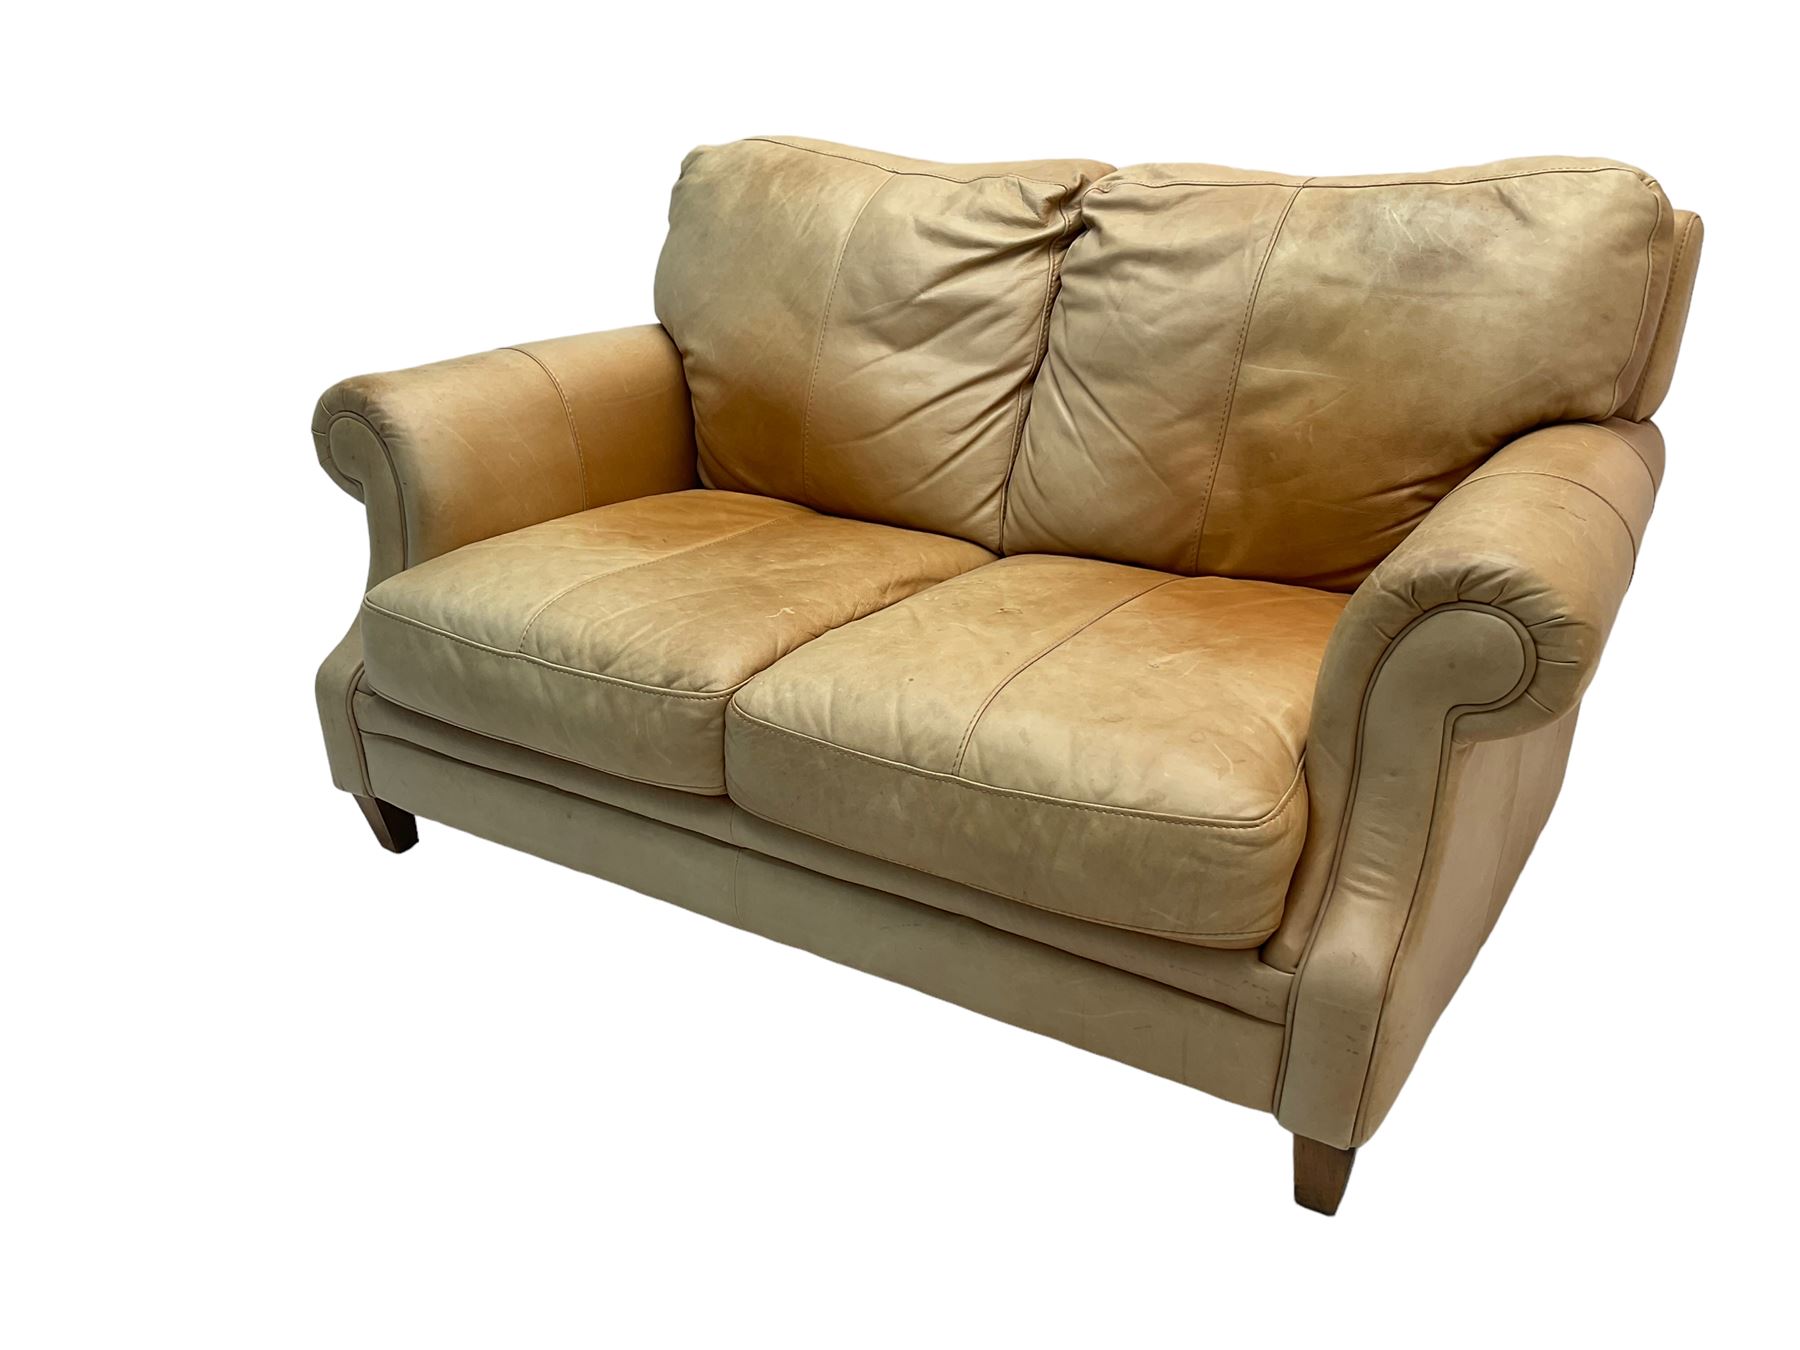 Two seat sofa, upholstered in pale tan leather with scrolled arms - The ...